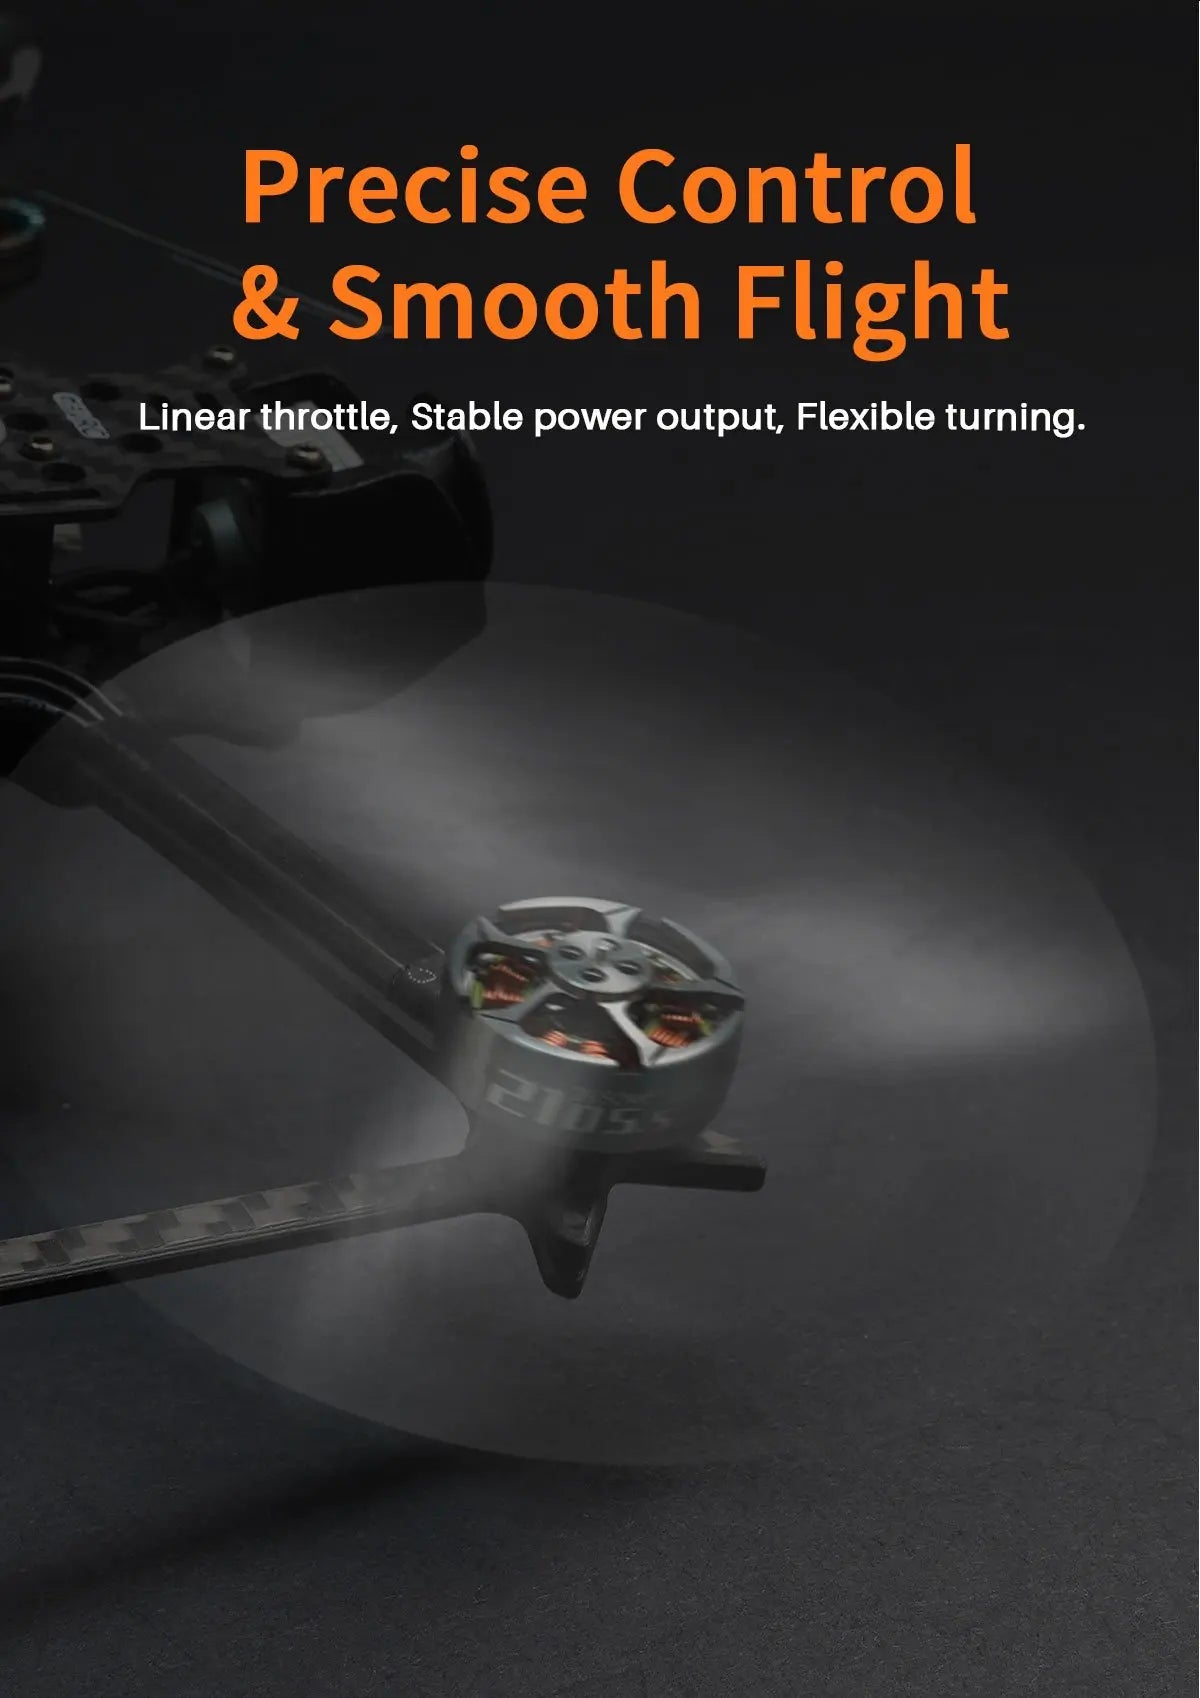 GEPRC SPEEDX2 0803 Brushless Motor, Precise Control & Smooth Flight Linear throttle, Stable power output, Flexible